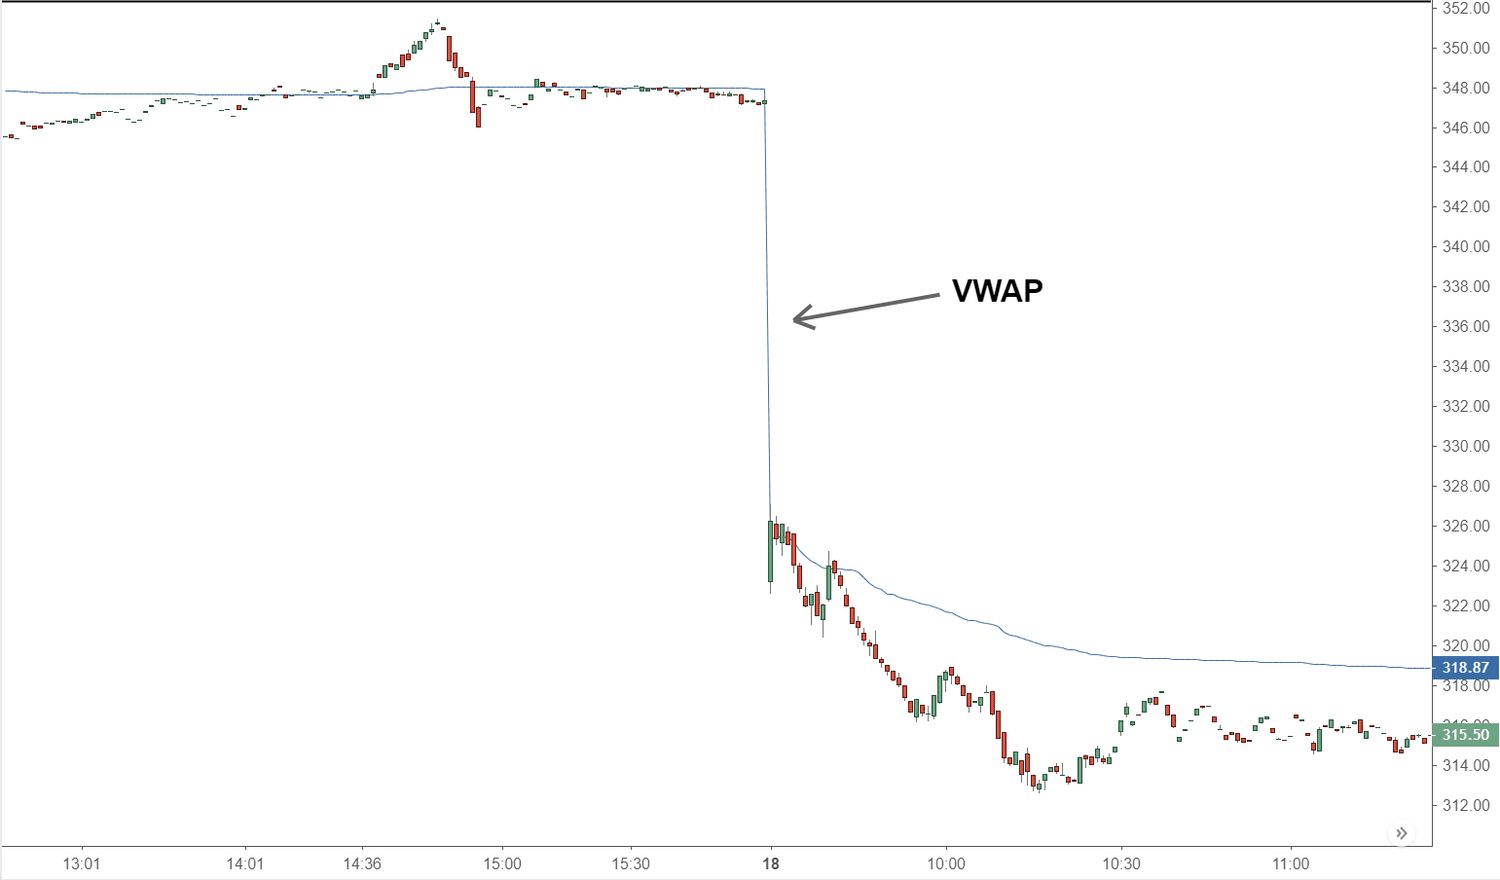 What Is VWAP In Trading